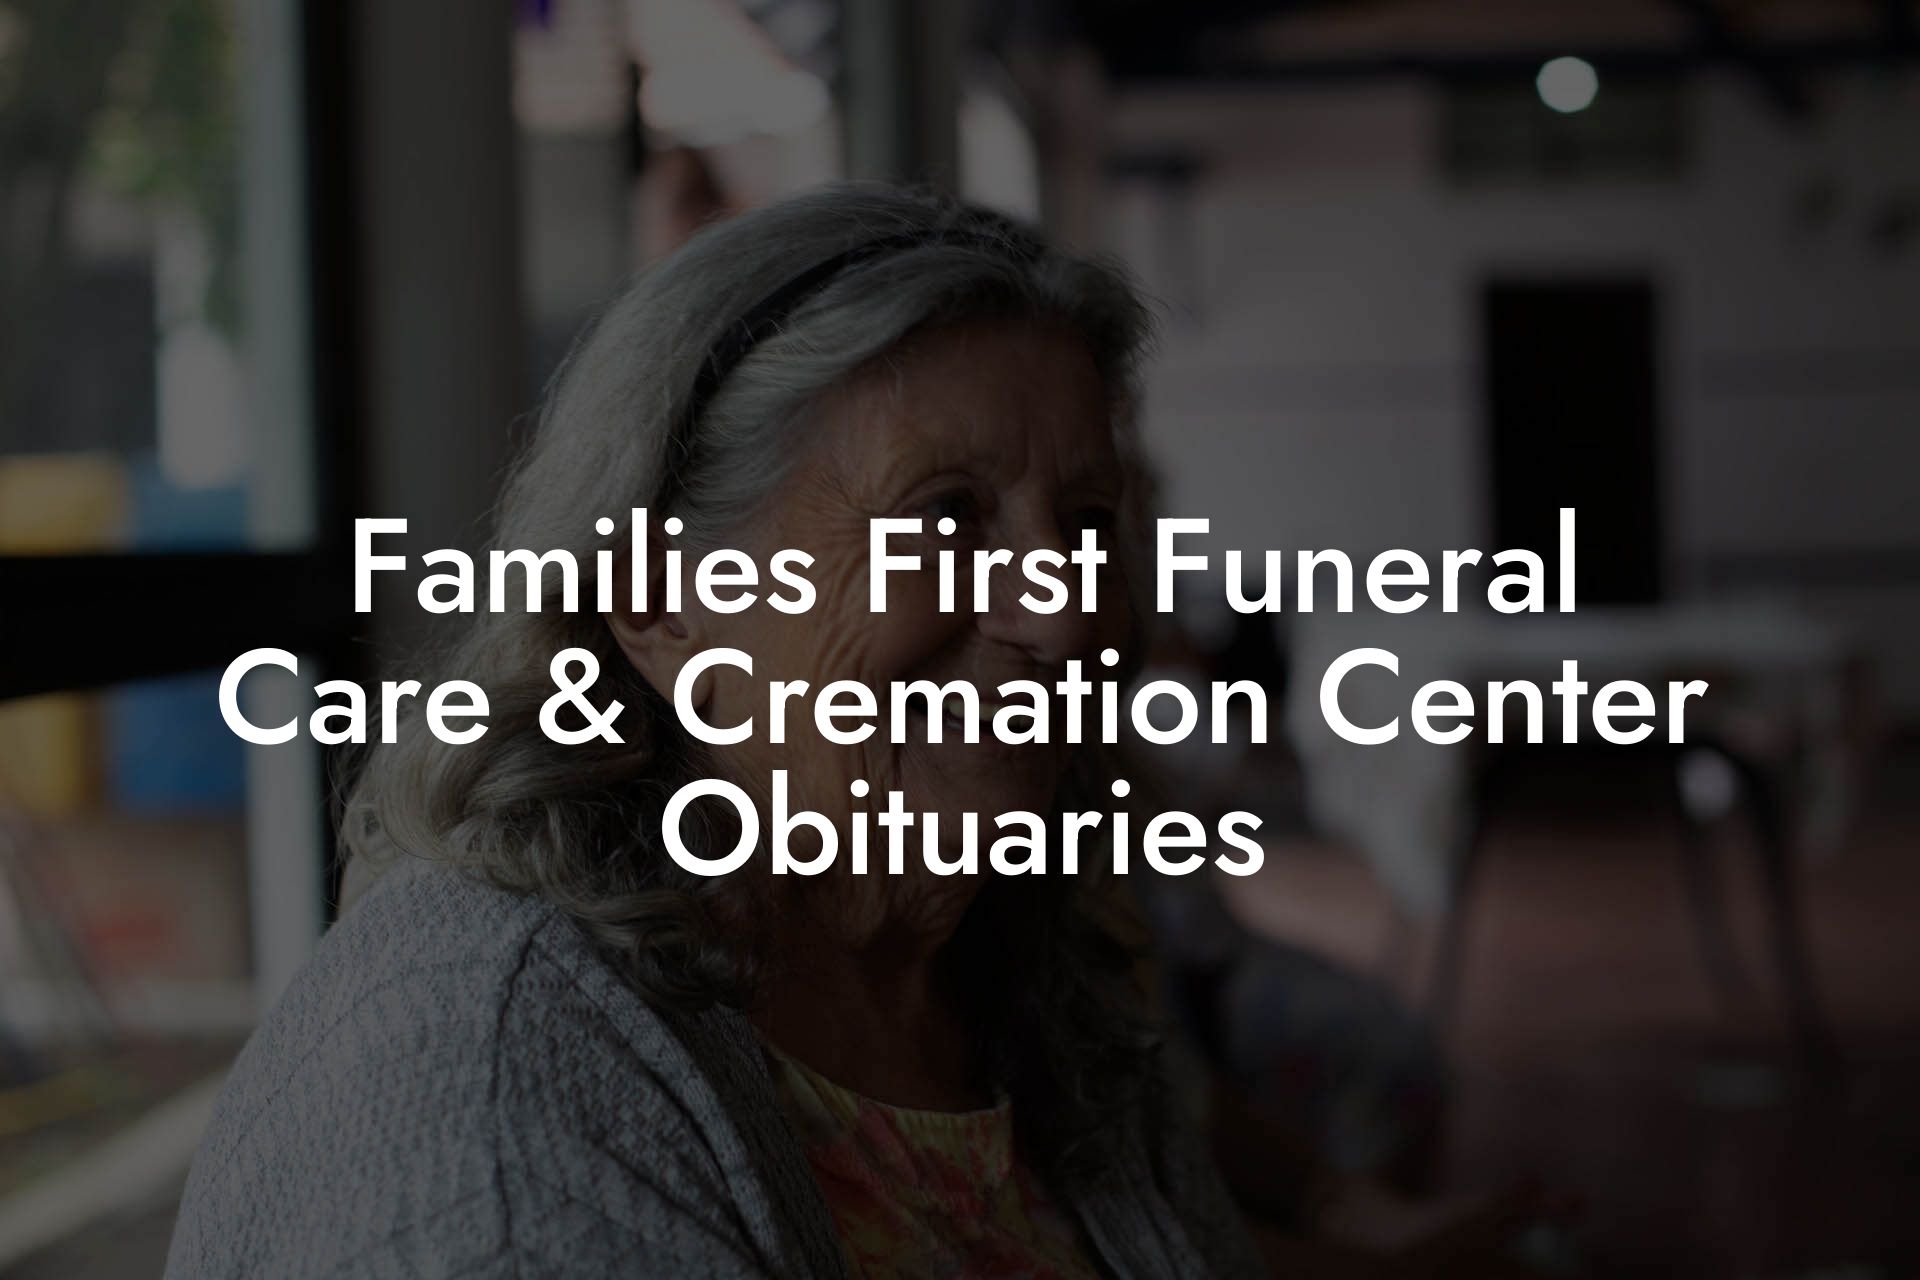 Families First Funeral Care & Cremation Center Obituaries